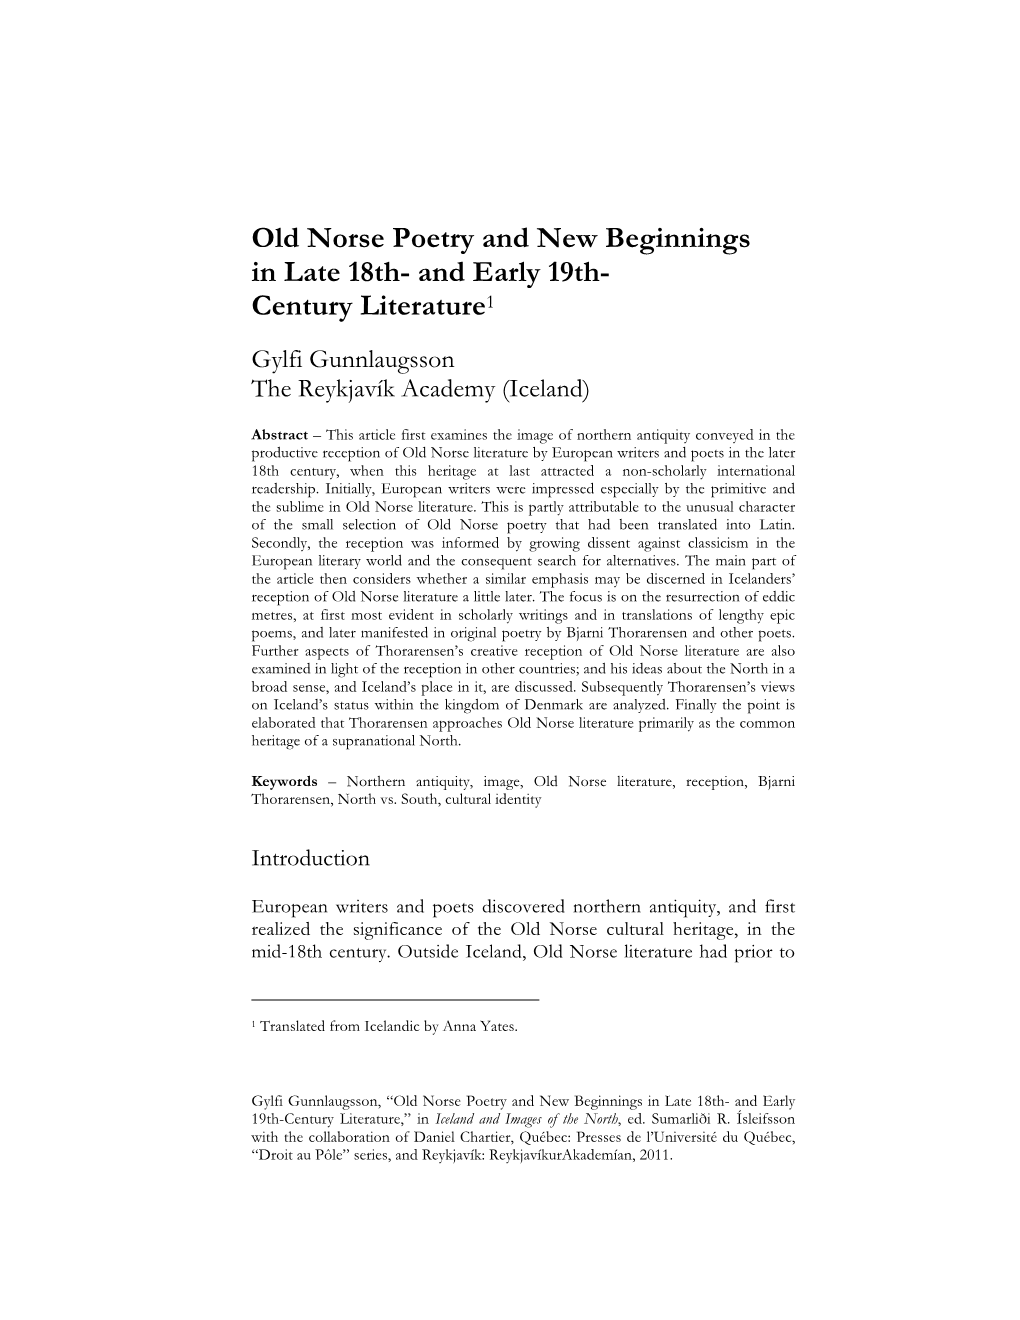 Old Norse Poetry and New Beginnings in Late 18Th- and Early 19Th- Century Literature1